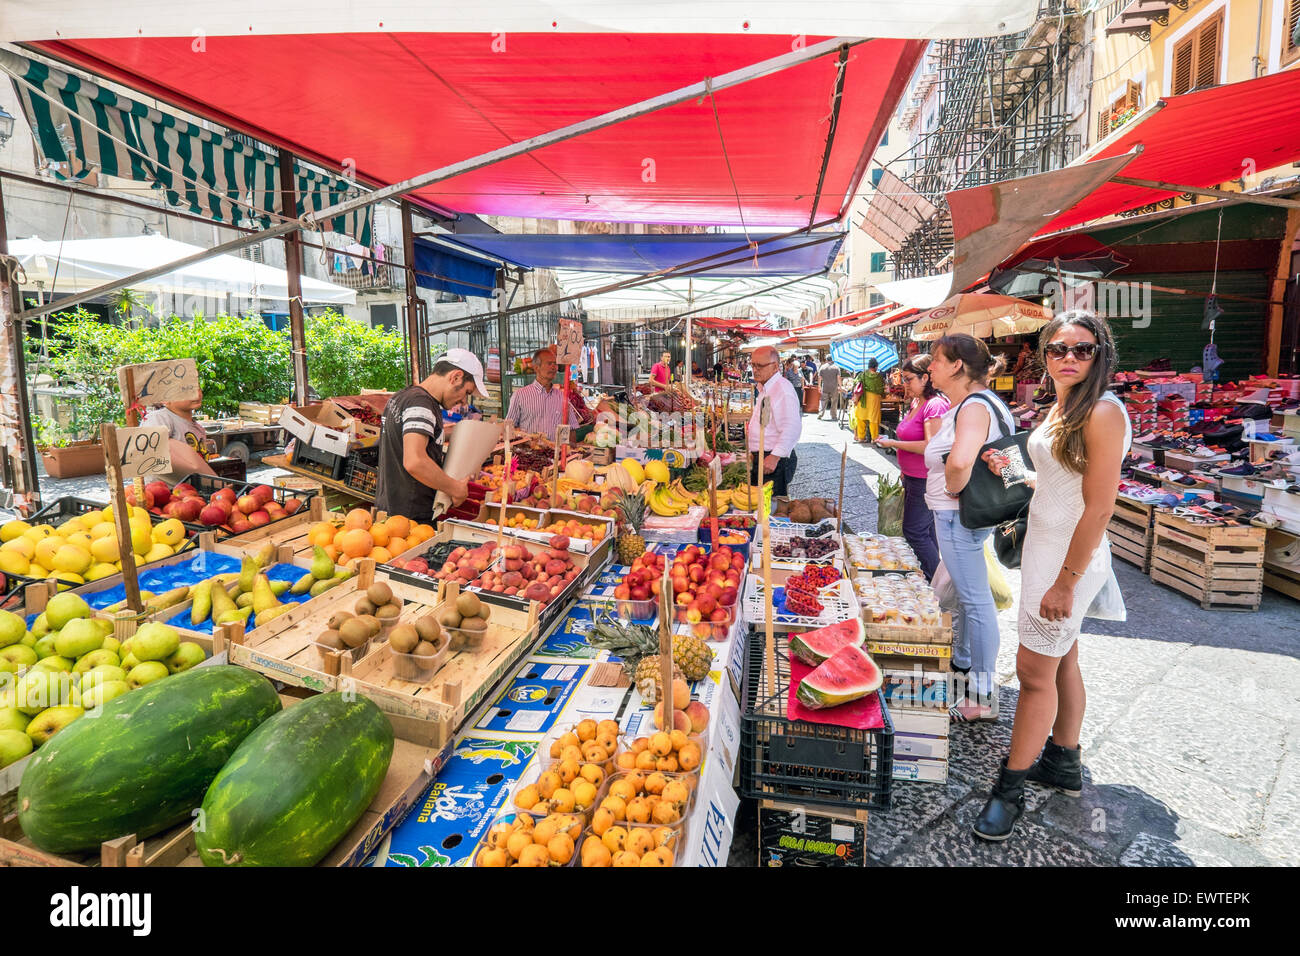 Mercato il Capo is one of several famous outdoor markets in Palermo, Sicily  Stock Photo - Alamy